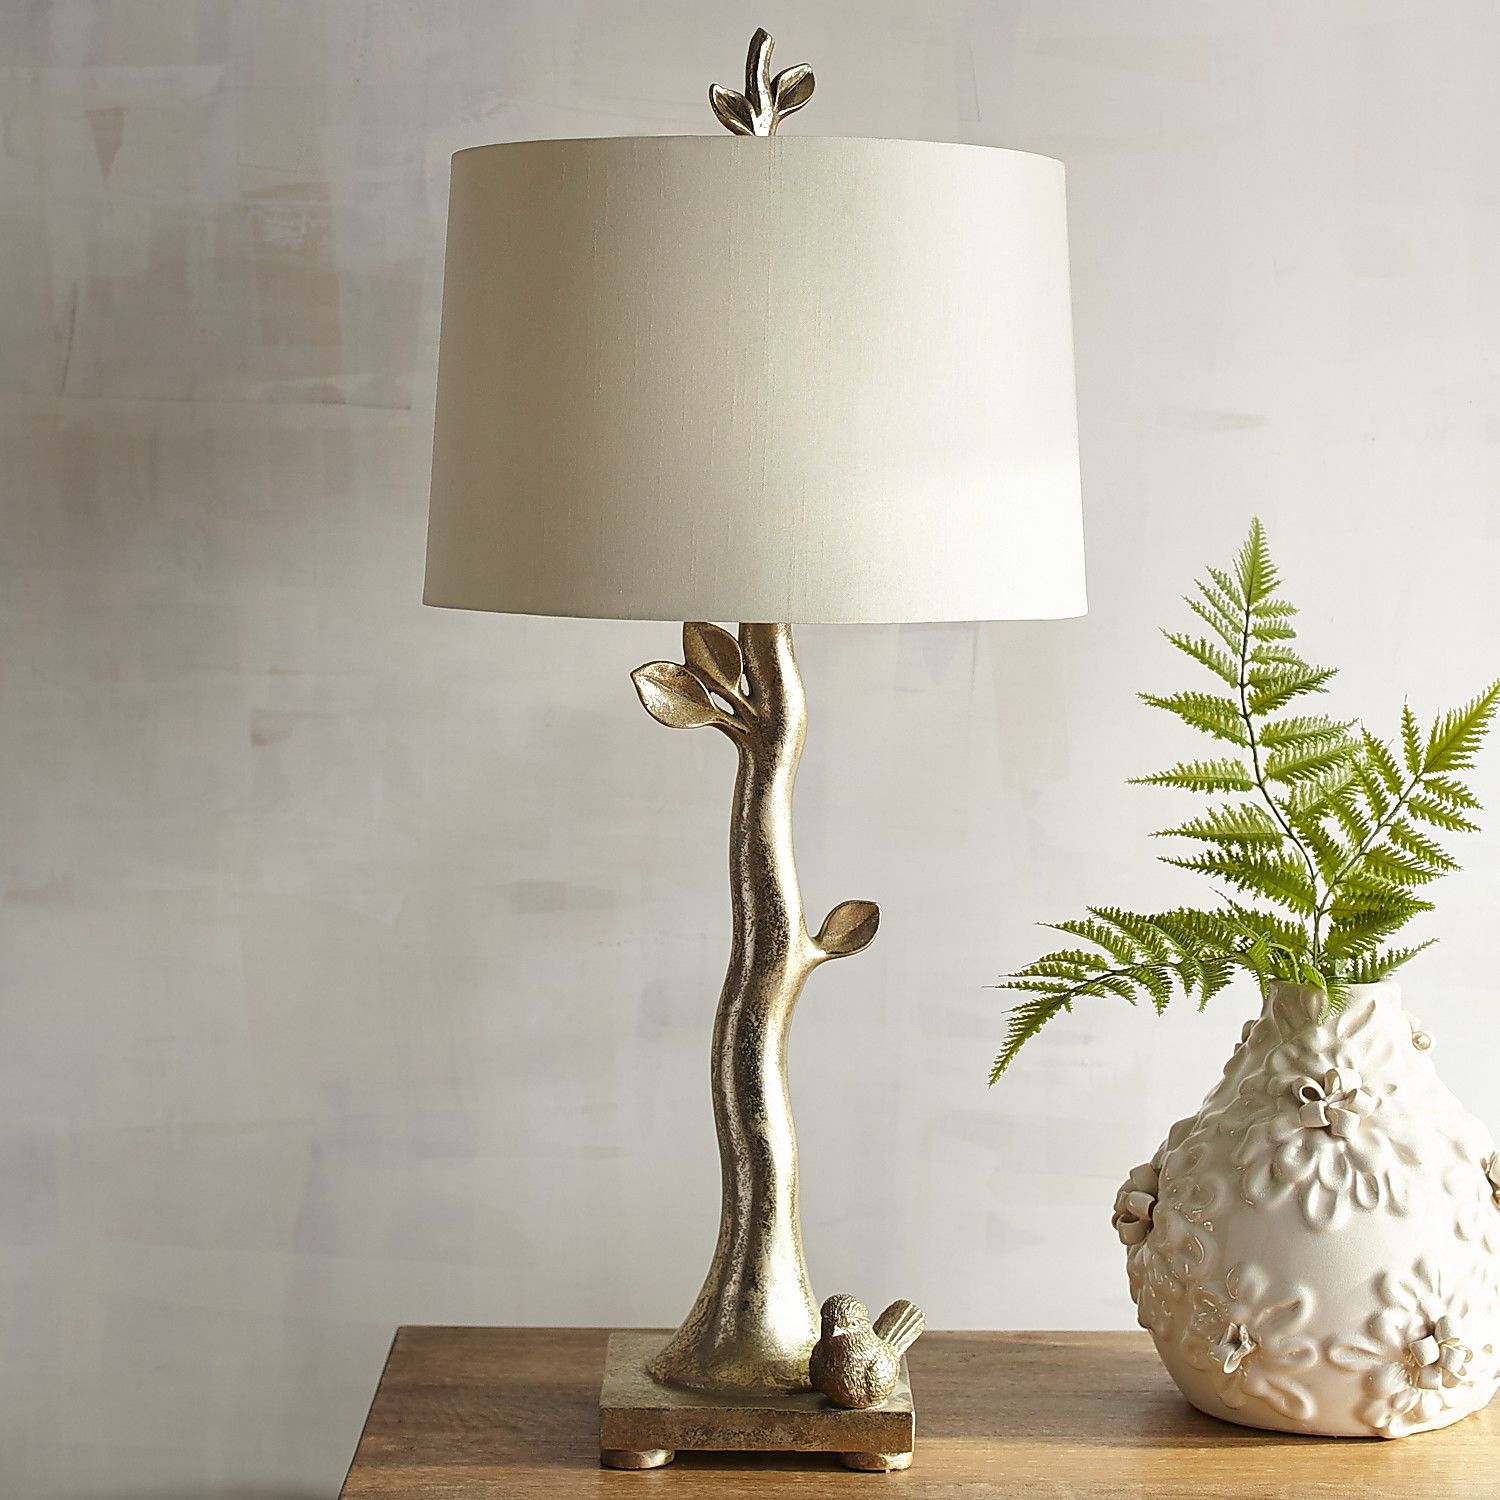 Bird & Branch Table Lamp | Pier 1 Imports